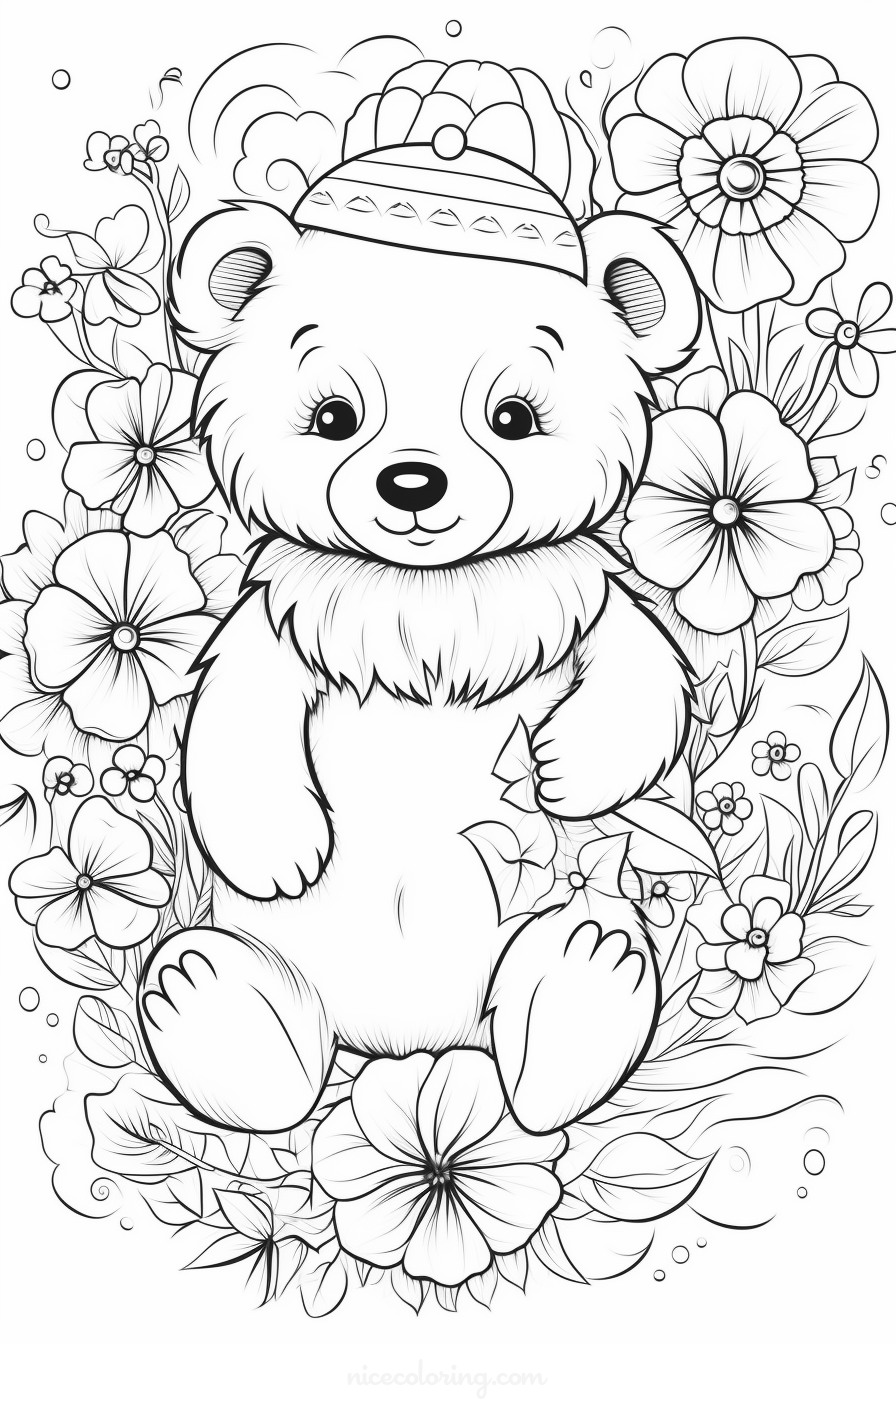 Playful bears coloring page